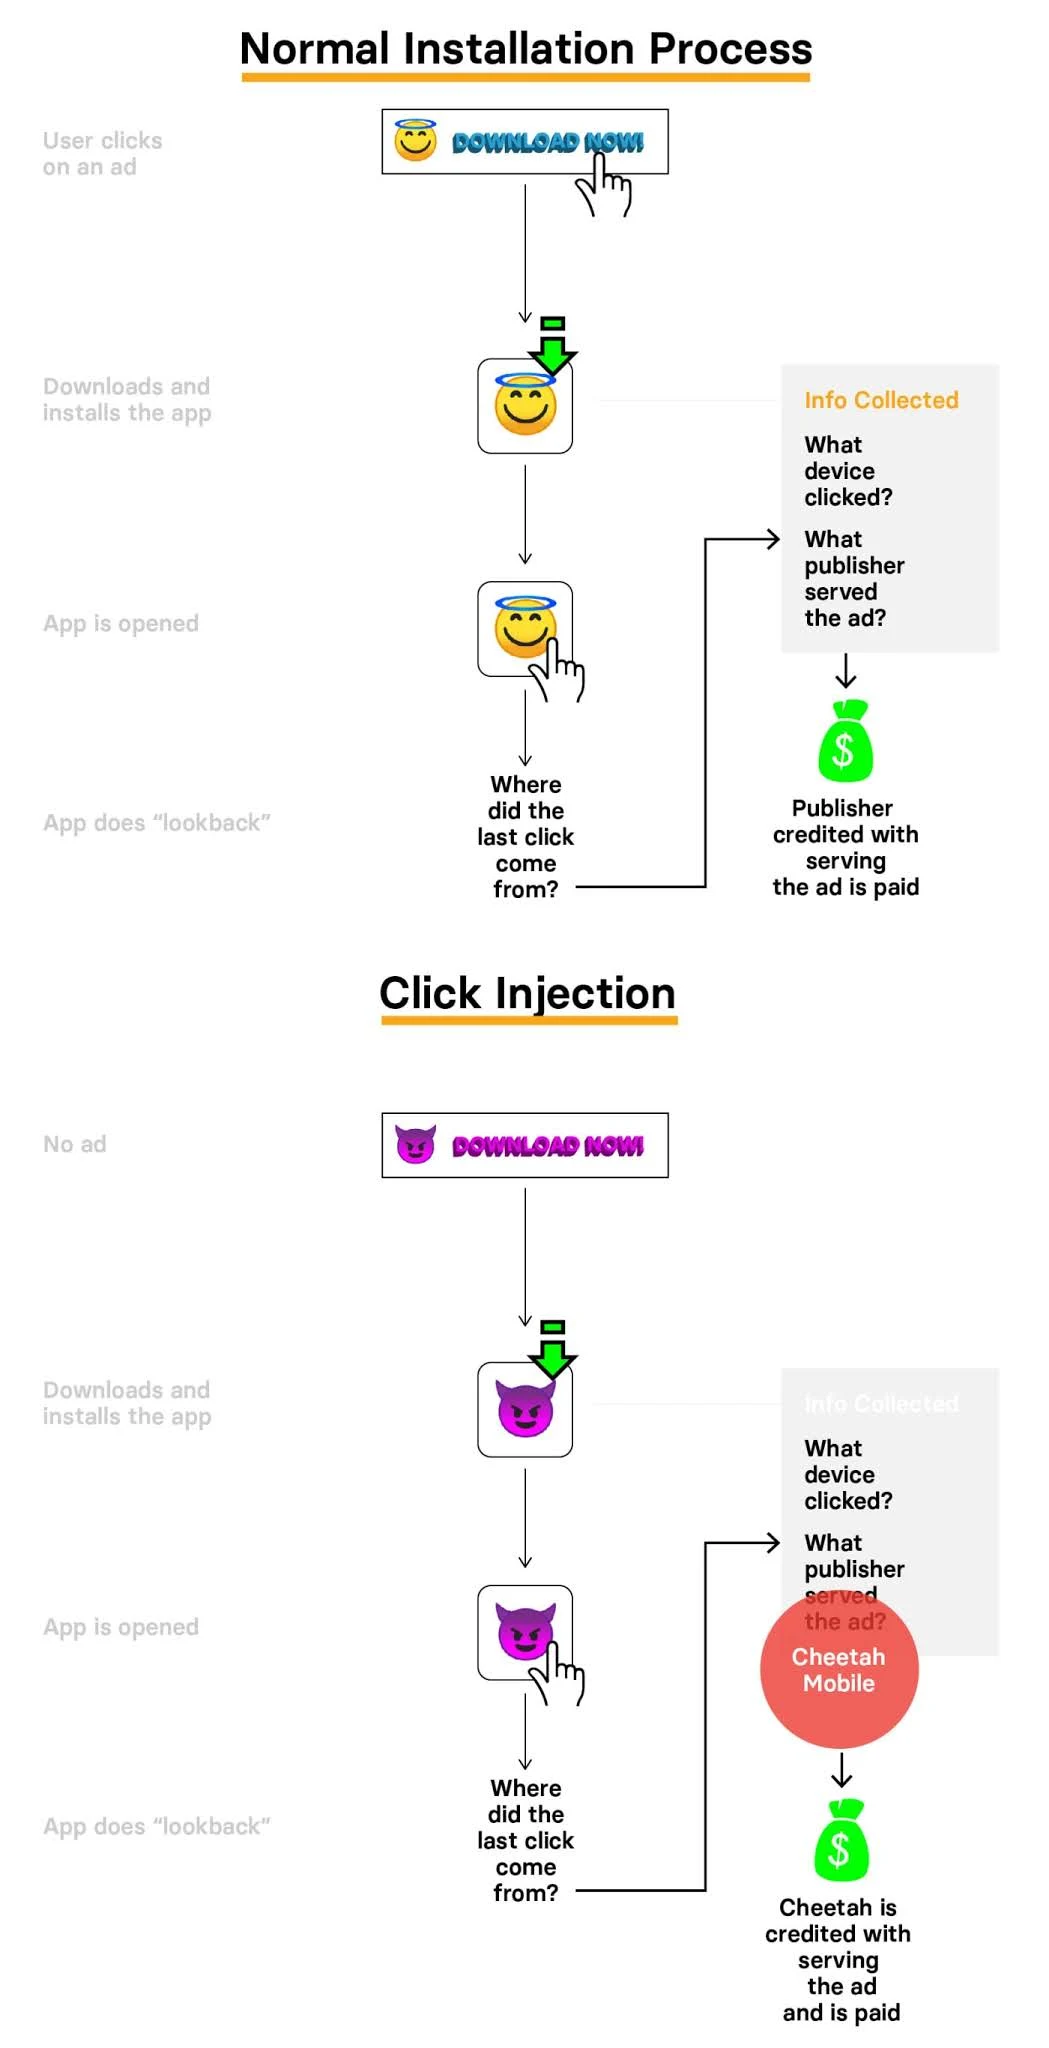 here's how the typical ad referral process versus a hijacked ad referral process works.